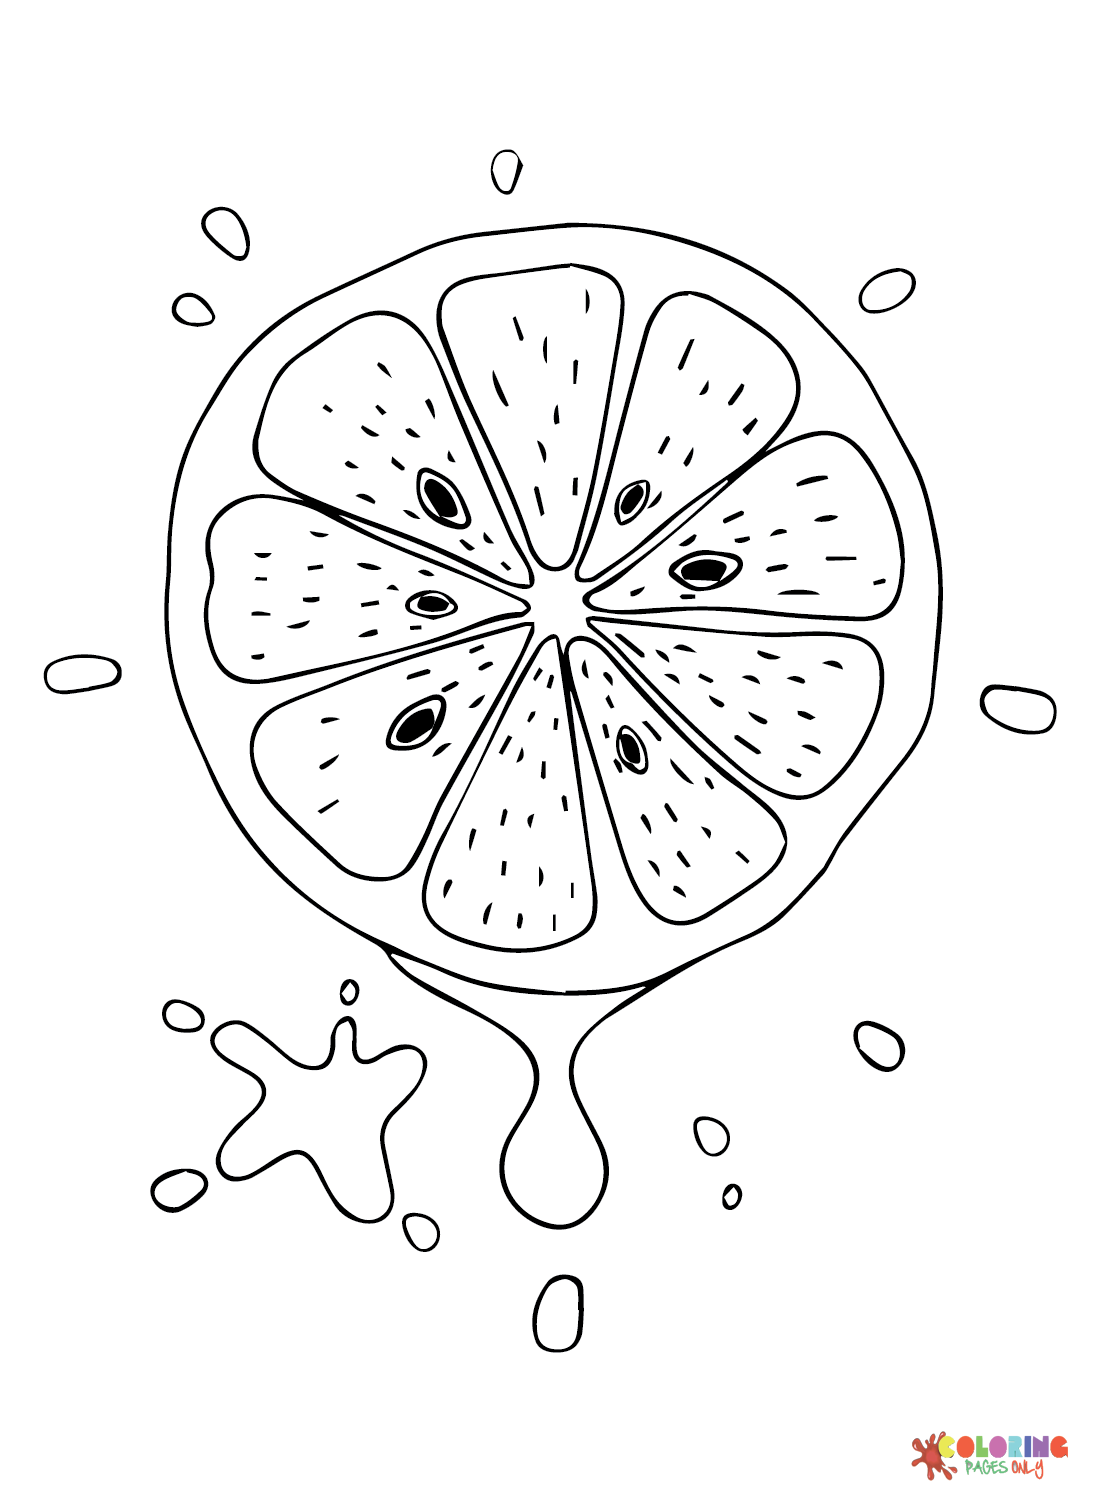 Drawing Citrus-fruits Coloring Page